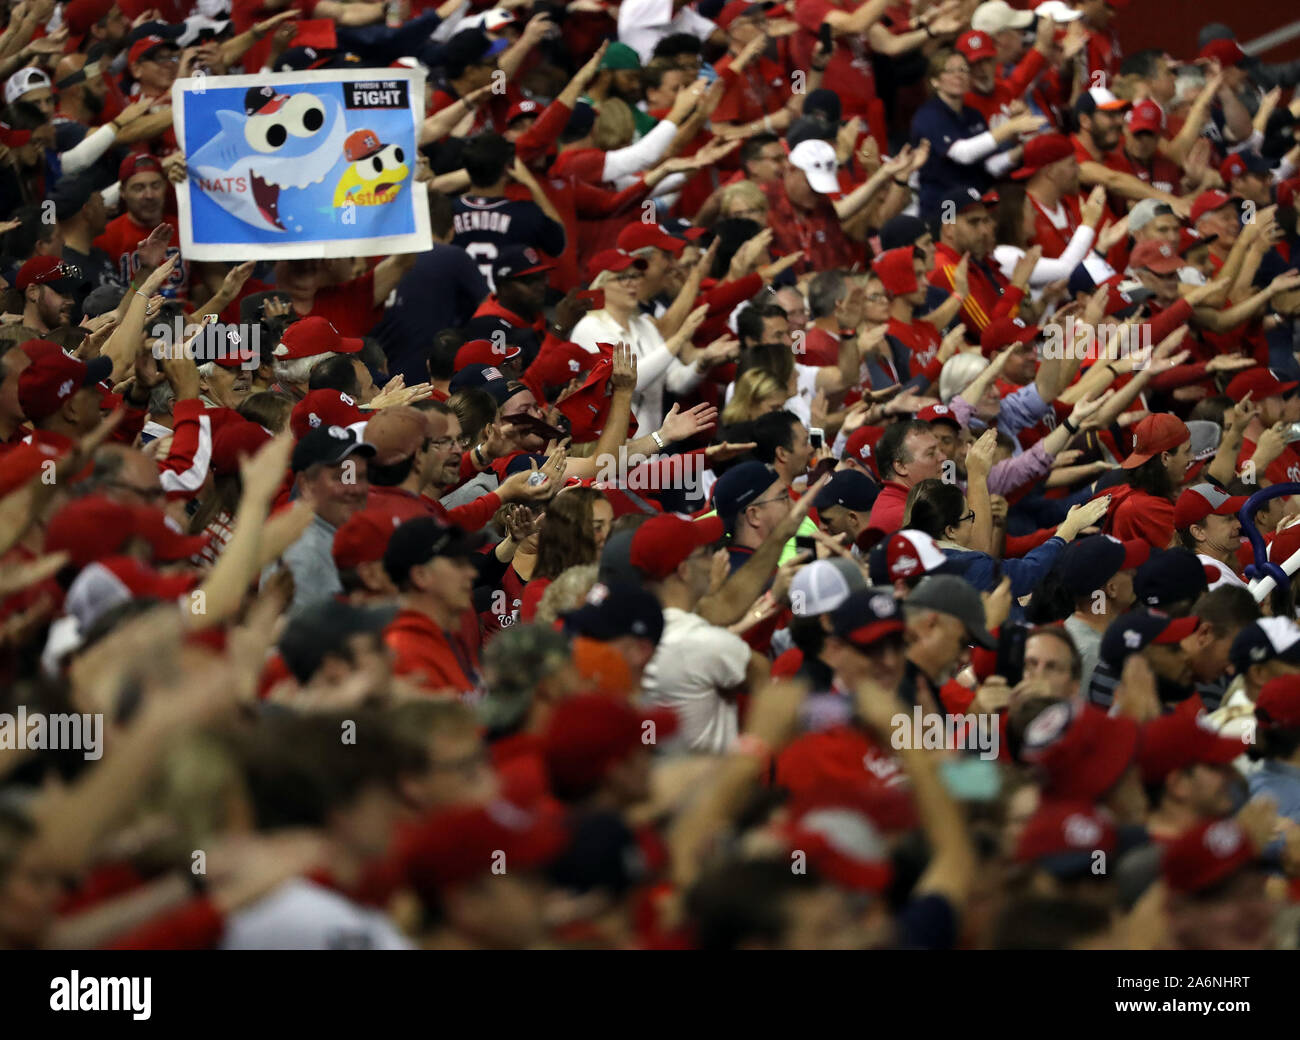 Washington, USA. 27th Oct, 2019. Washington Nationals fans cheer to 'Baby shark' during Game 5 of the World Series against the Houston Astros at Nationals Park in Washington, DC on Sunday, October 27, 2019. Photo by Mark Abraham/UPI Credit: UPI/Alamy Live News Stock Photo